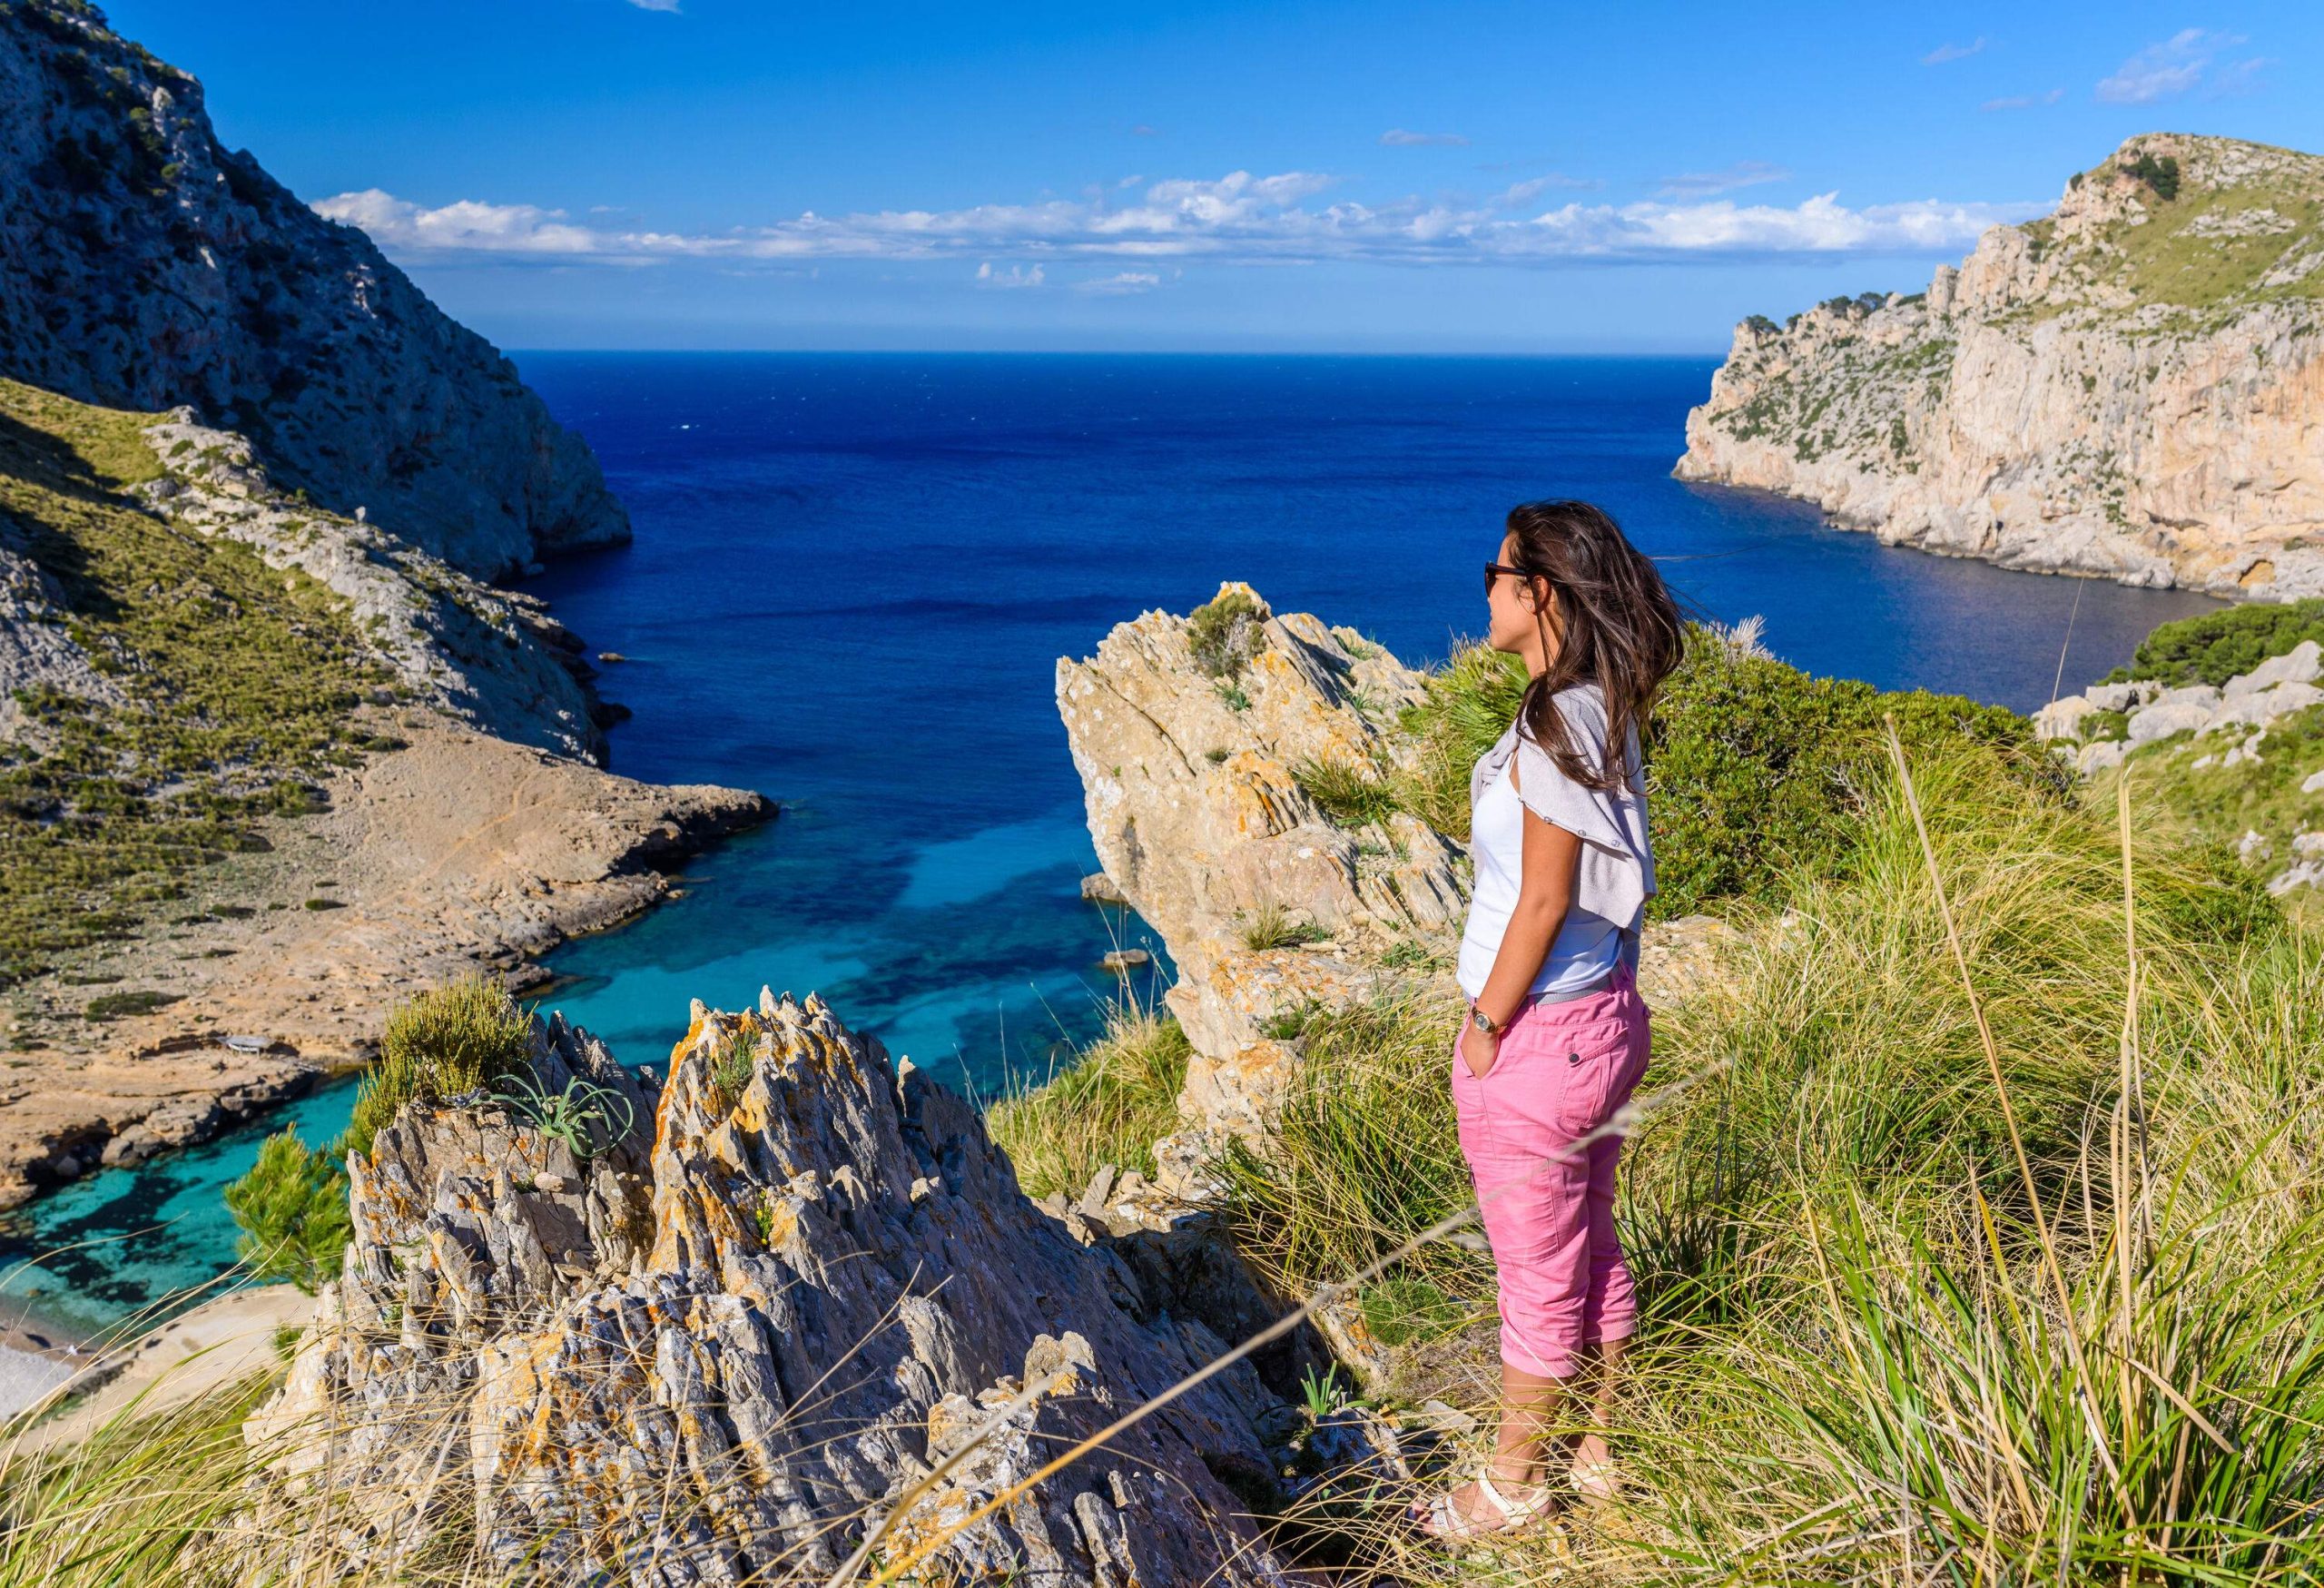 A person standing on a cliff looking out over the blue sea and rocky cliffs.